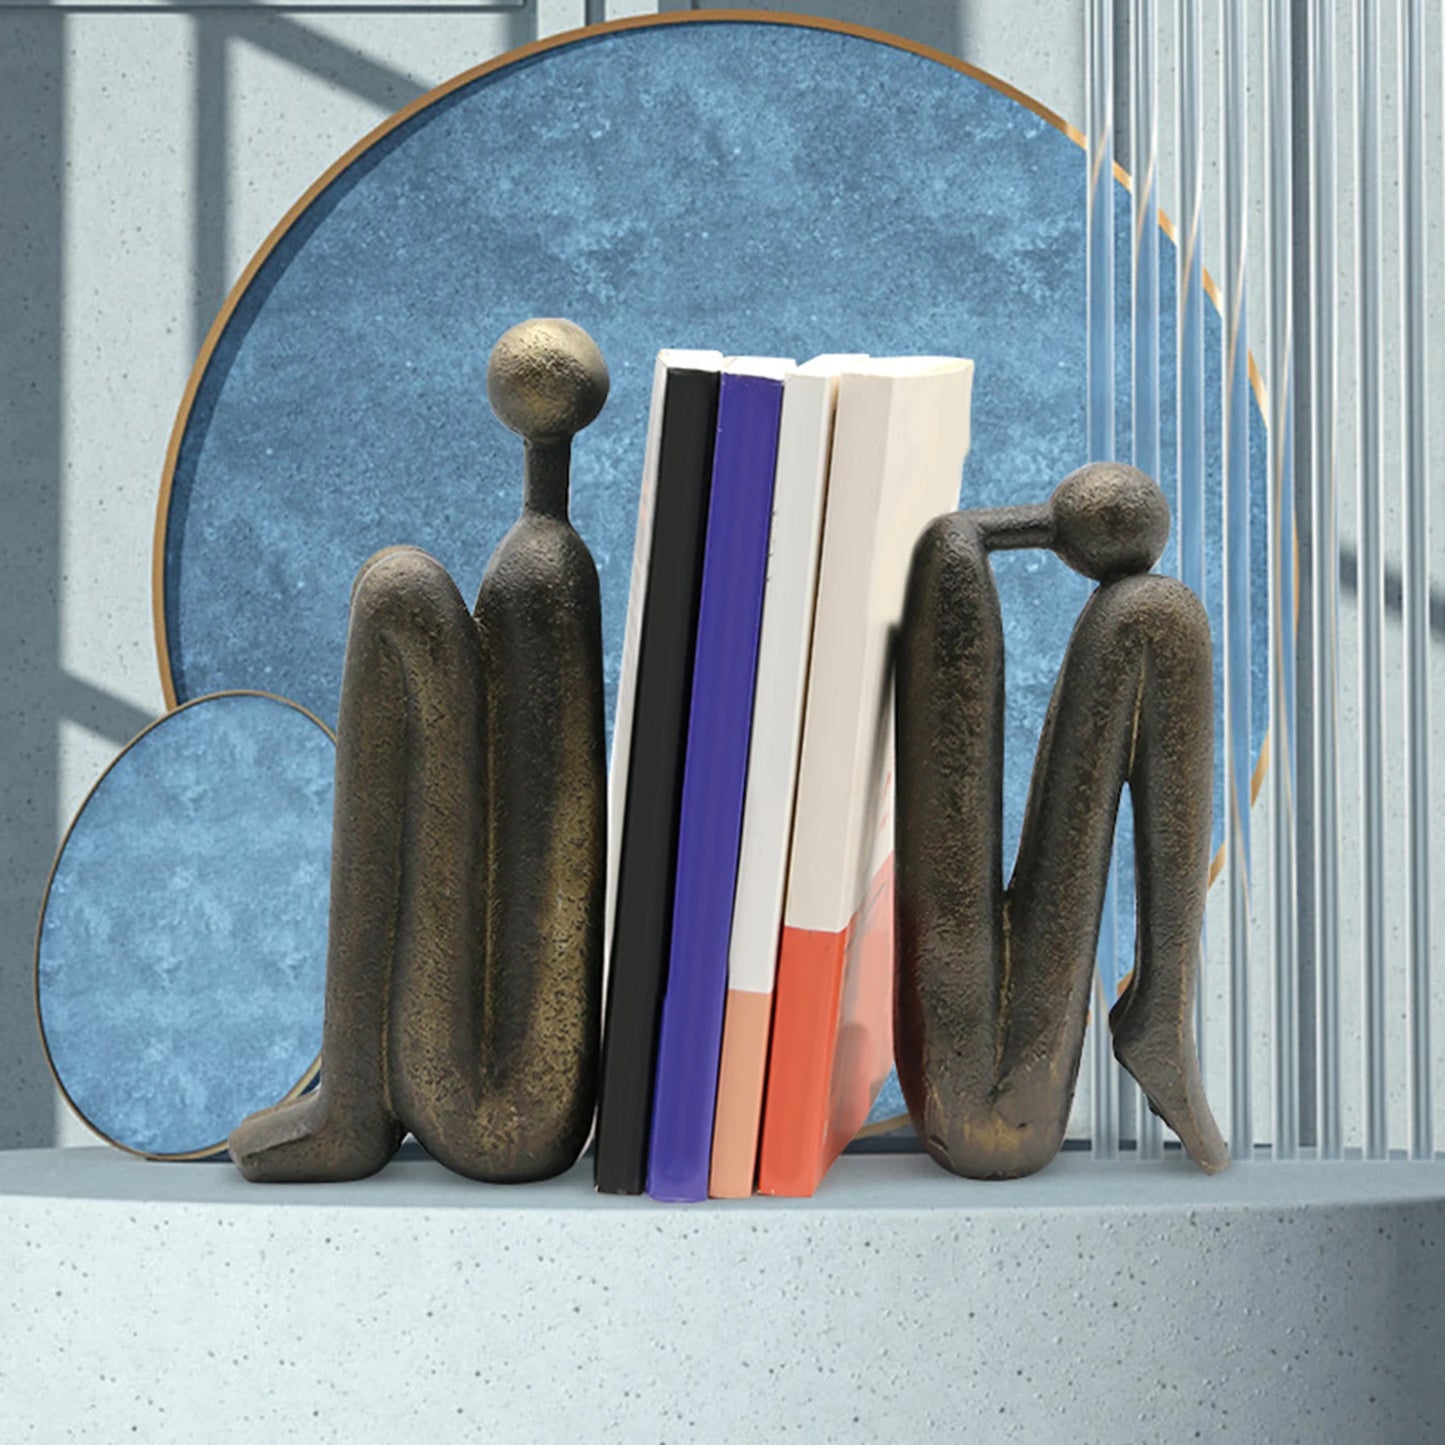 Thinker Bookends Home Resin Book Ends Nordic Decorative Bookends Book Stand Holder Desktop Ornament Living Room Figurine Bookend